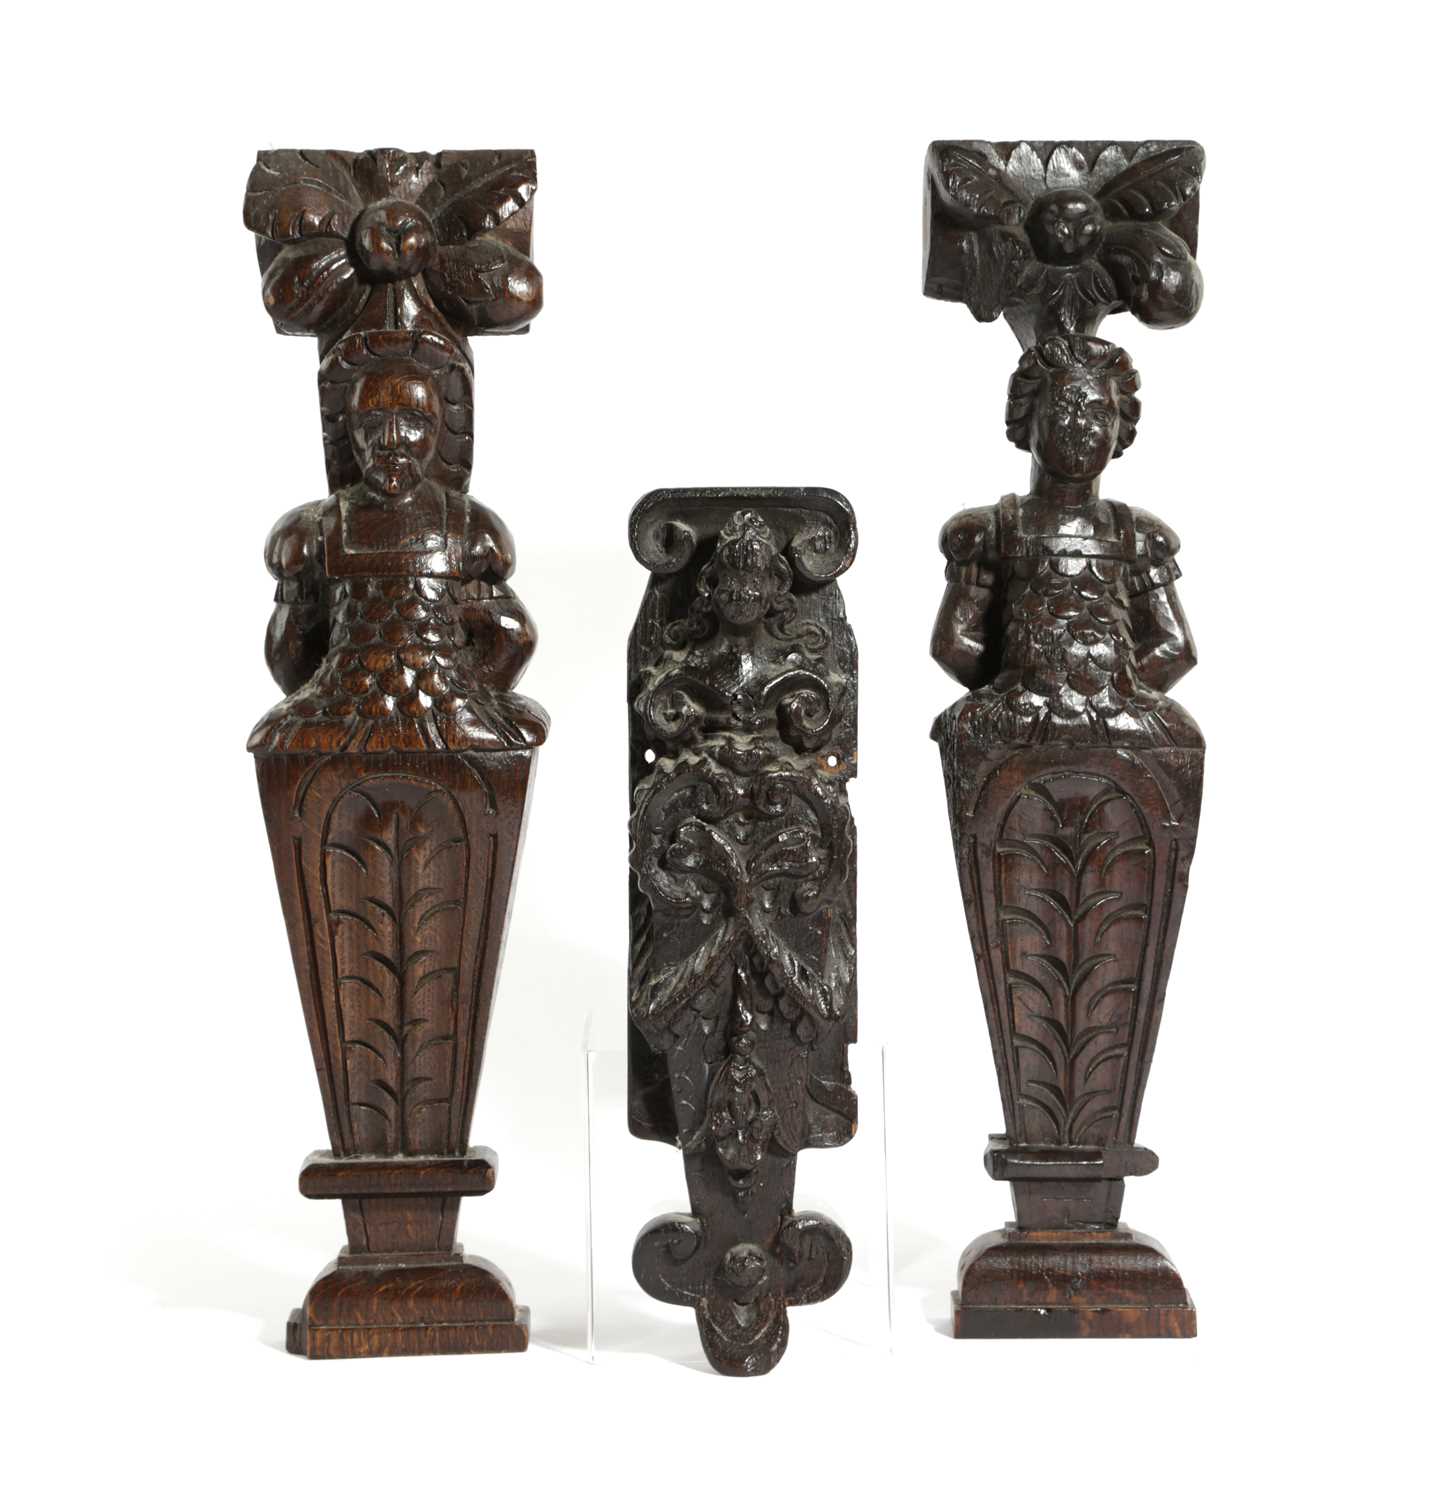 A PAIR OF OAK TERMS 17TH CENTURY the male and female busts beneath large flowers, with carved bodies